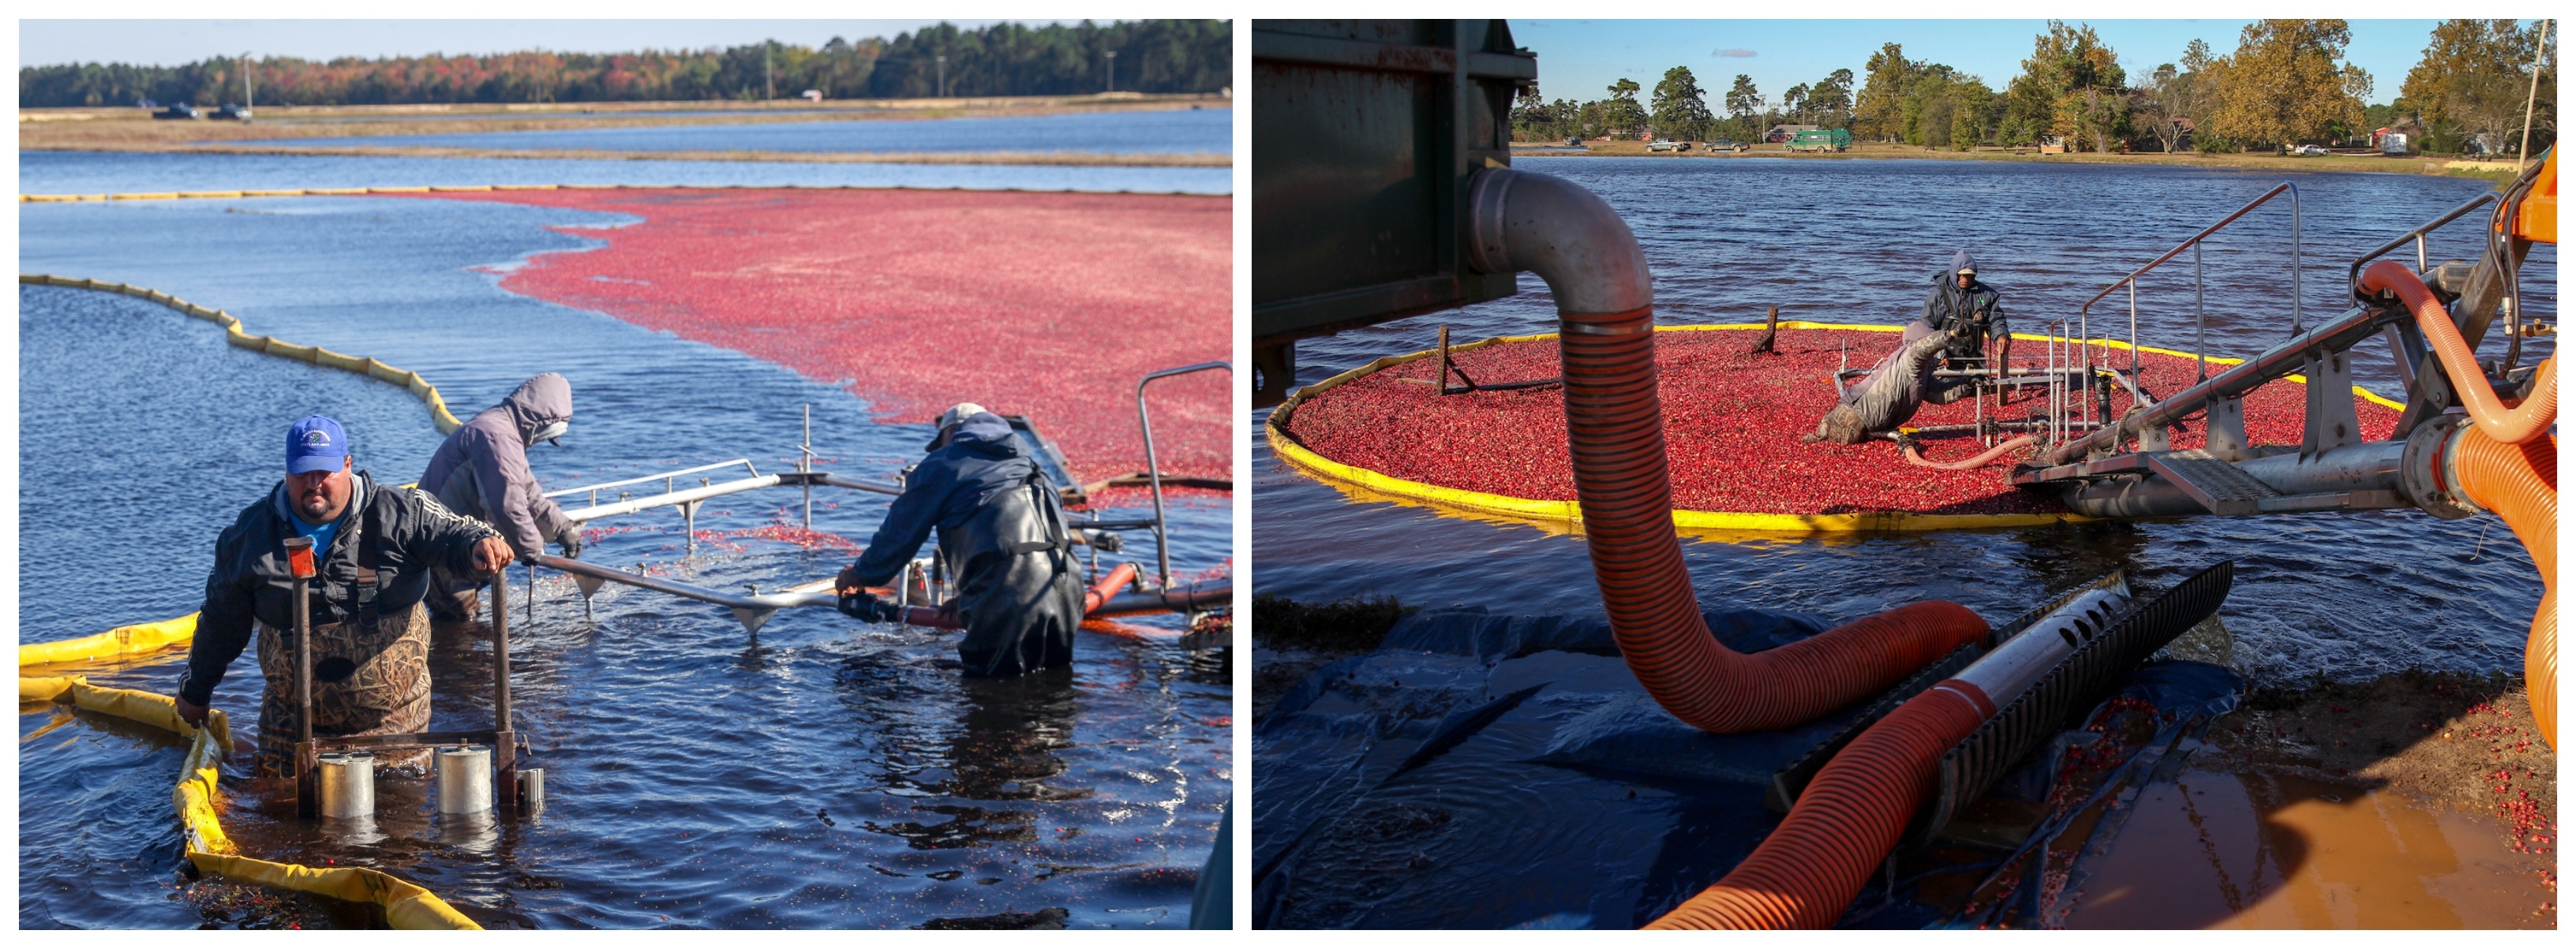 Left: Workers corral cranberries into limited area using a bright yellow hose. Right: Cranberries after they have been constrained to a circle, before they'll be vacuumed out